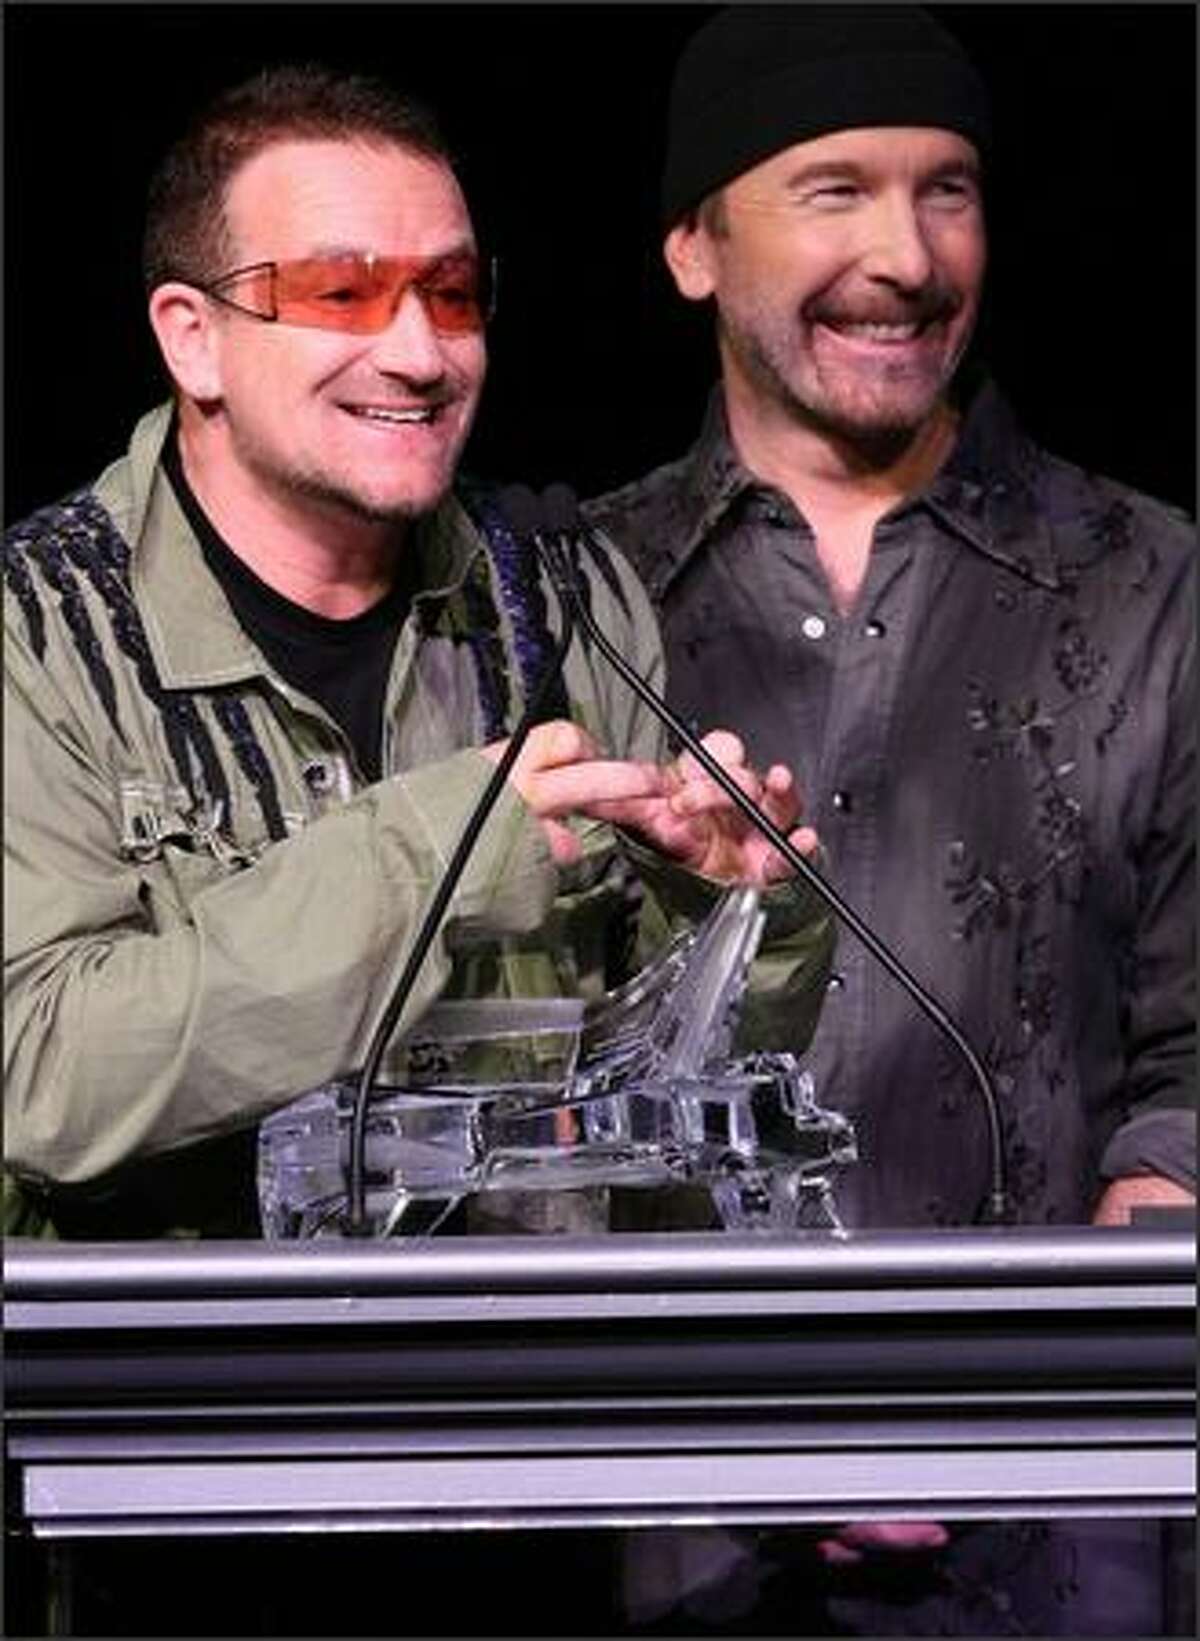 Musicians Bono and The Edge of U2 onstage during the Thelonious Monk Institute of Jazz honoring B.B. King event held at the Kodak Theatre on October 26, 2008, in Los Angeles, California. (Getty)